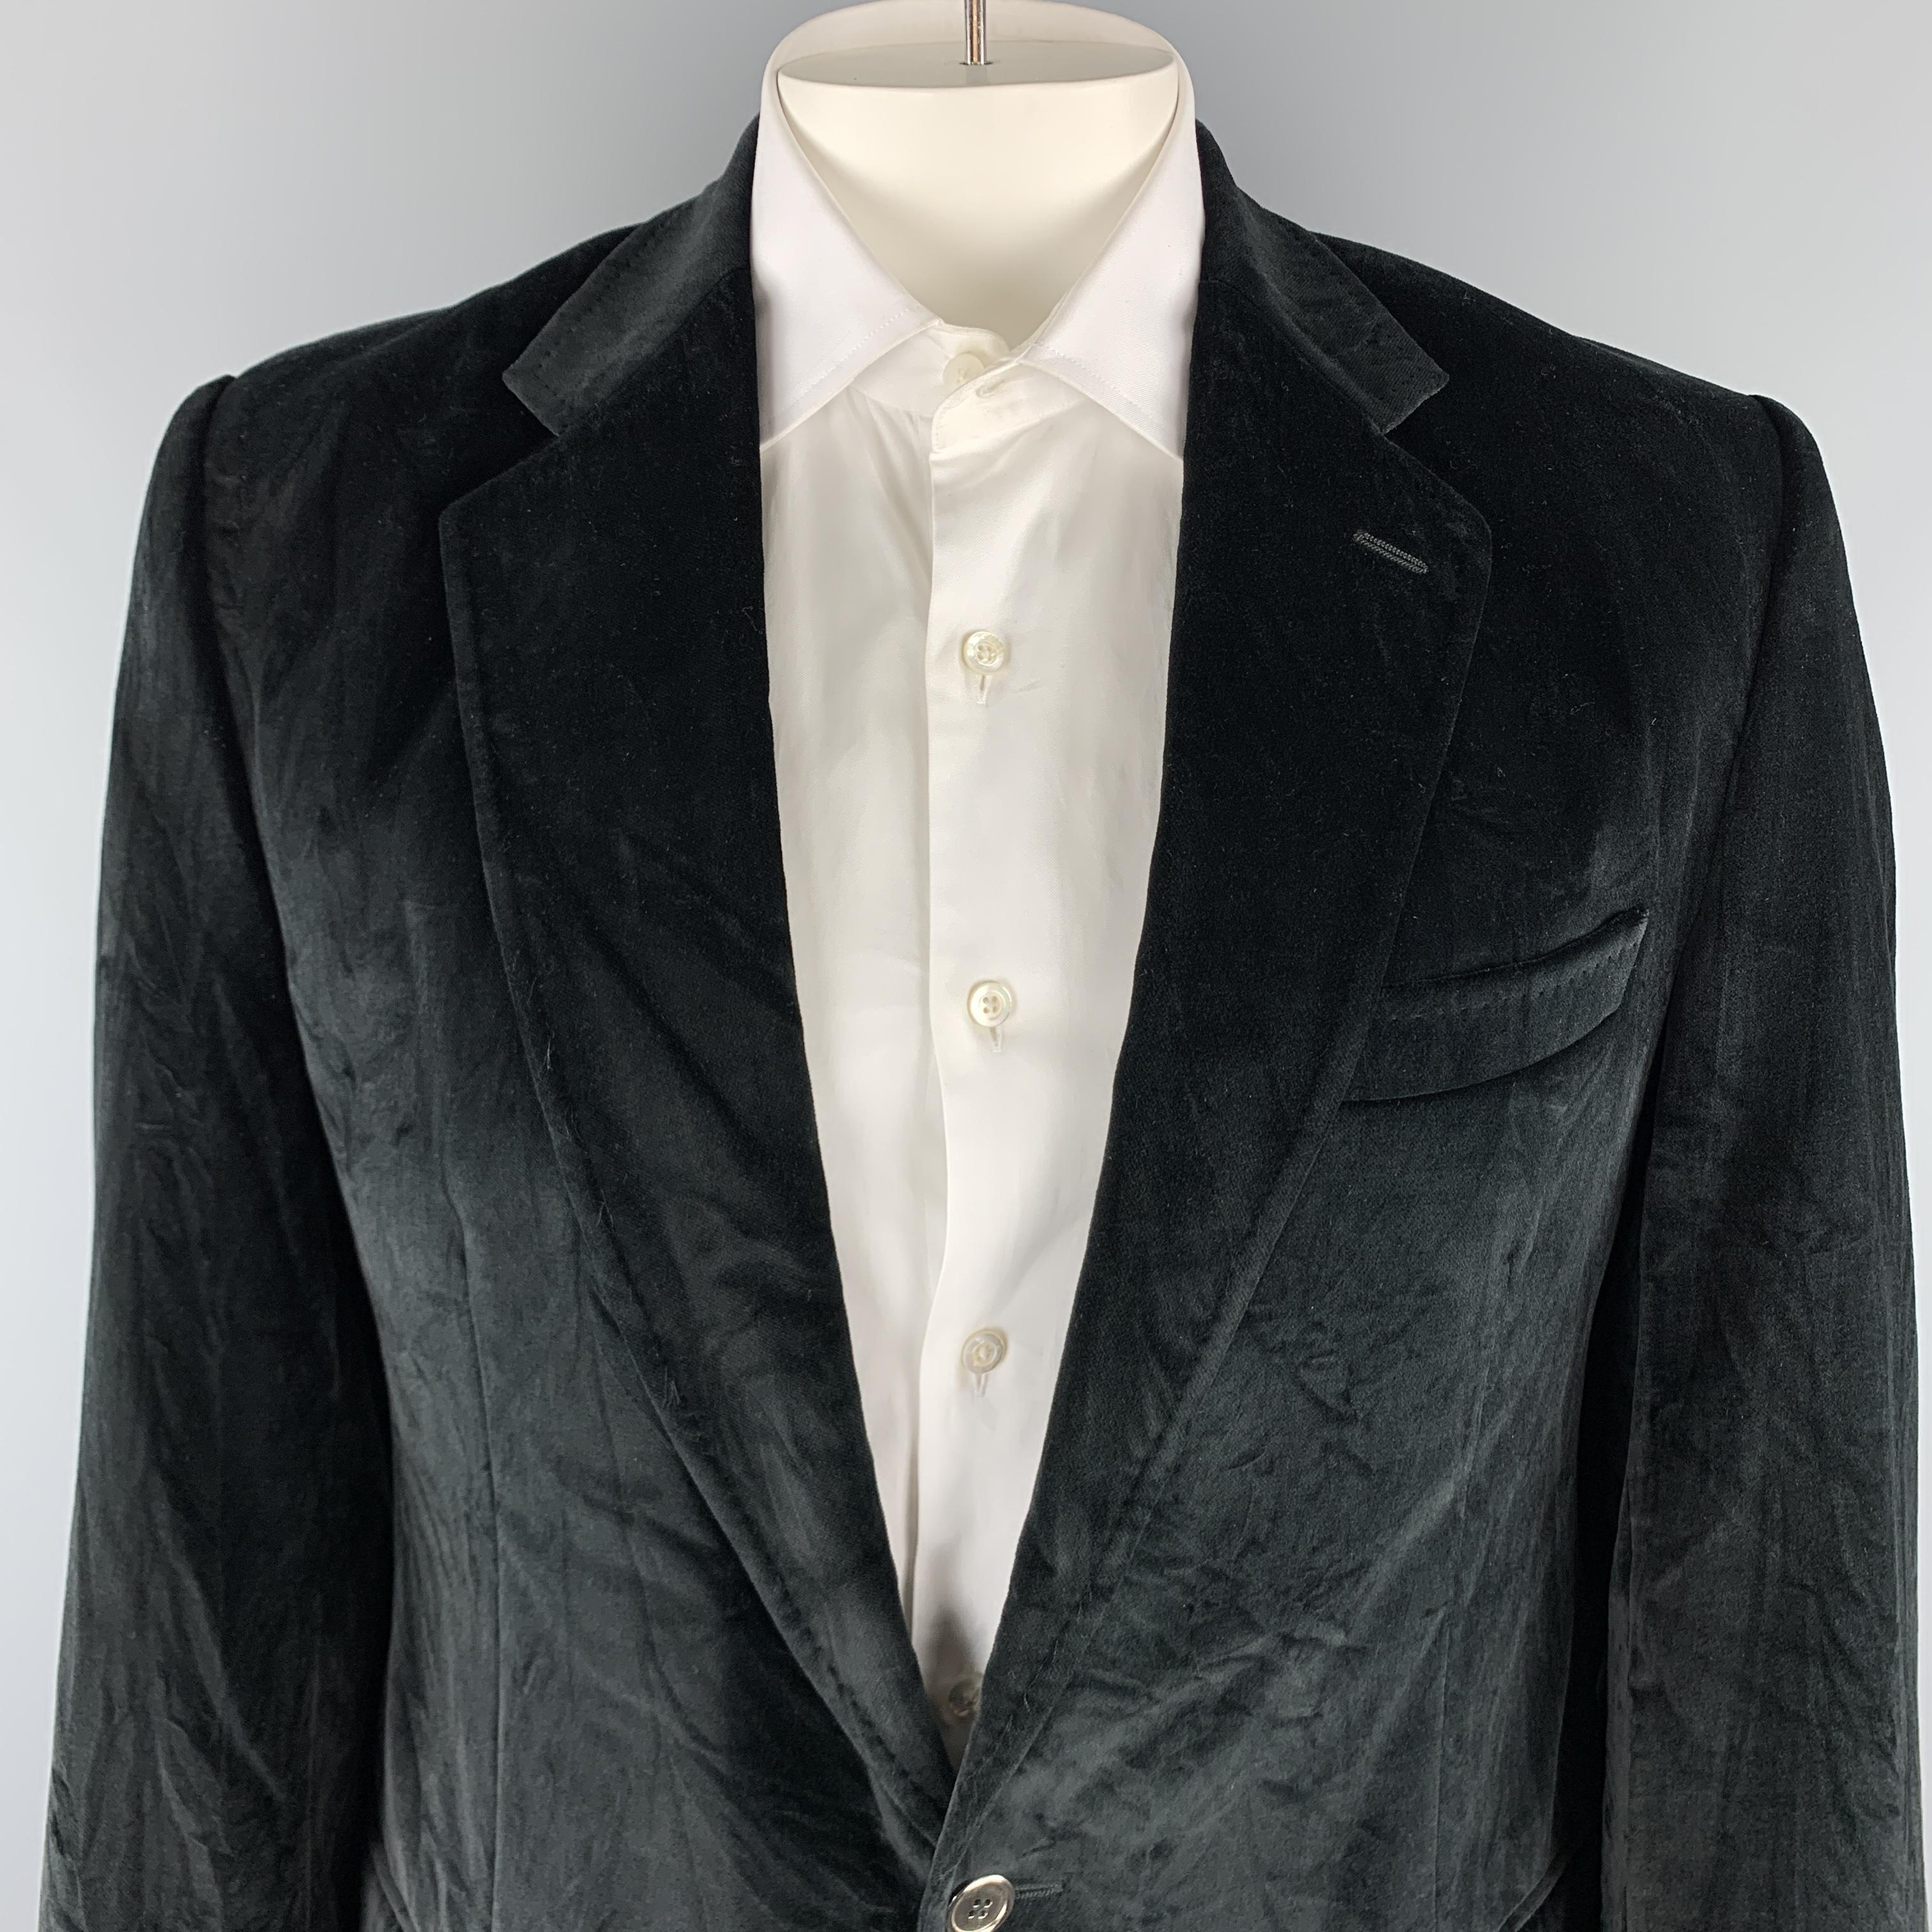 DOLCE & GABBANA sport coat comes in a black cotton velvet material, featuring a notch lapel, two buttons at closure, slit and flap pockets, single breasted, buttoned cuffs, and a double vent at back. Wear throughout from storage. Made in